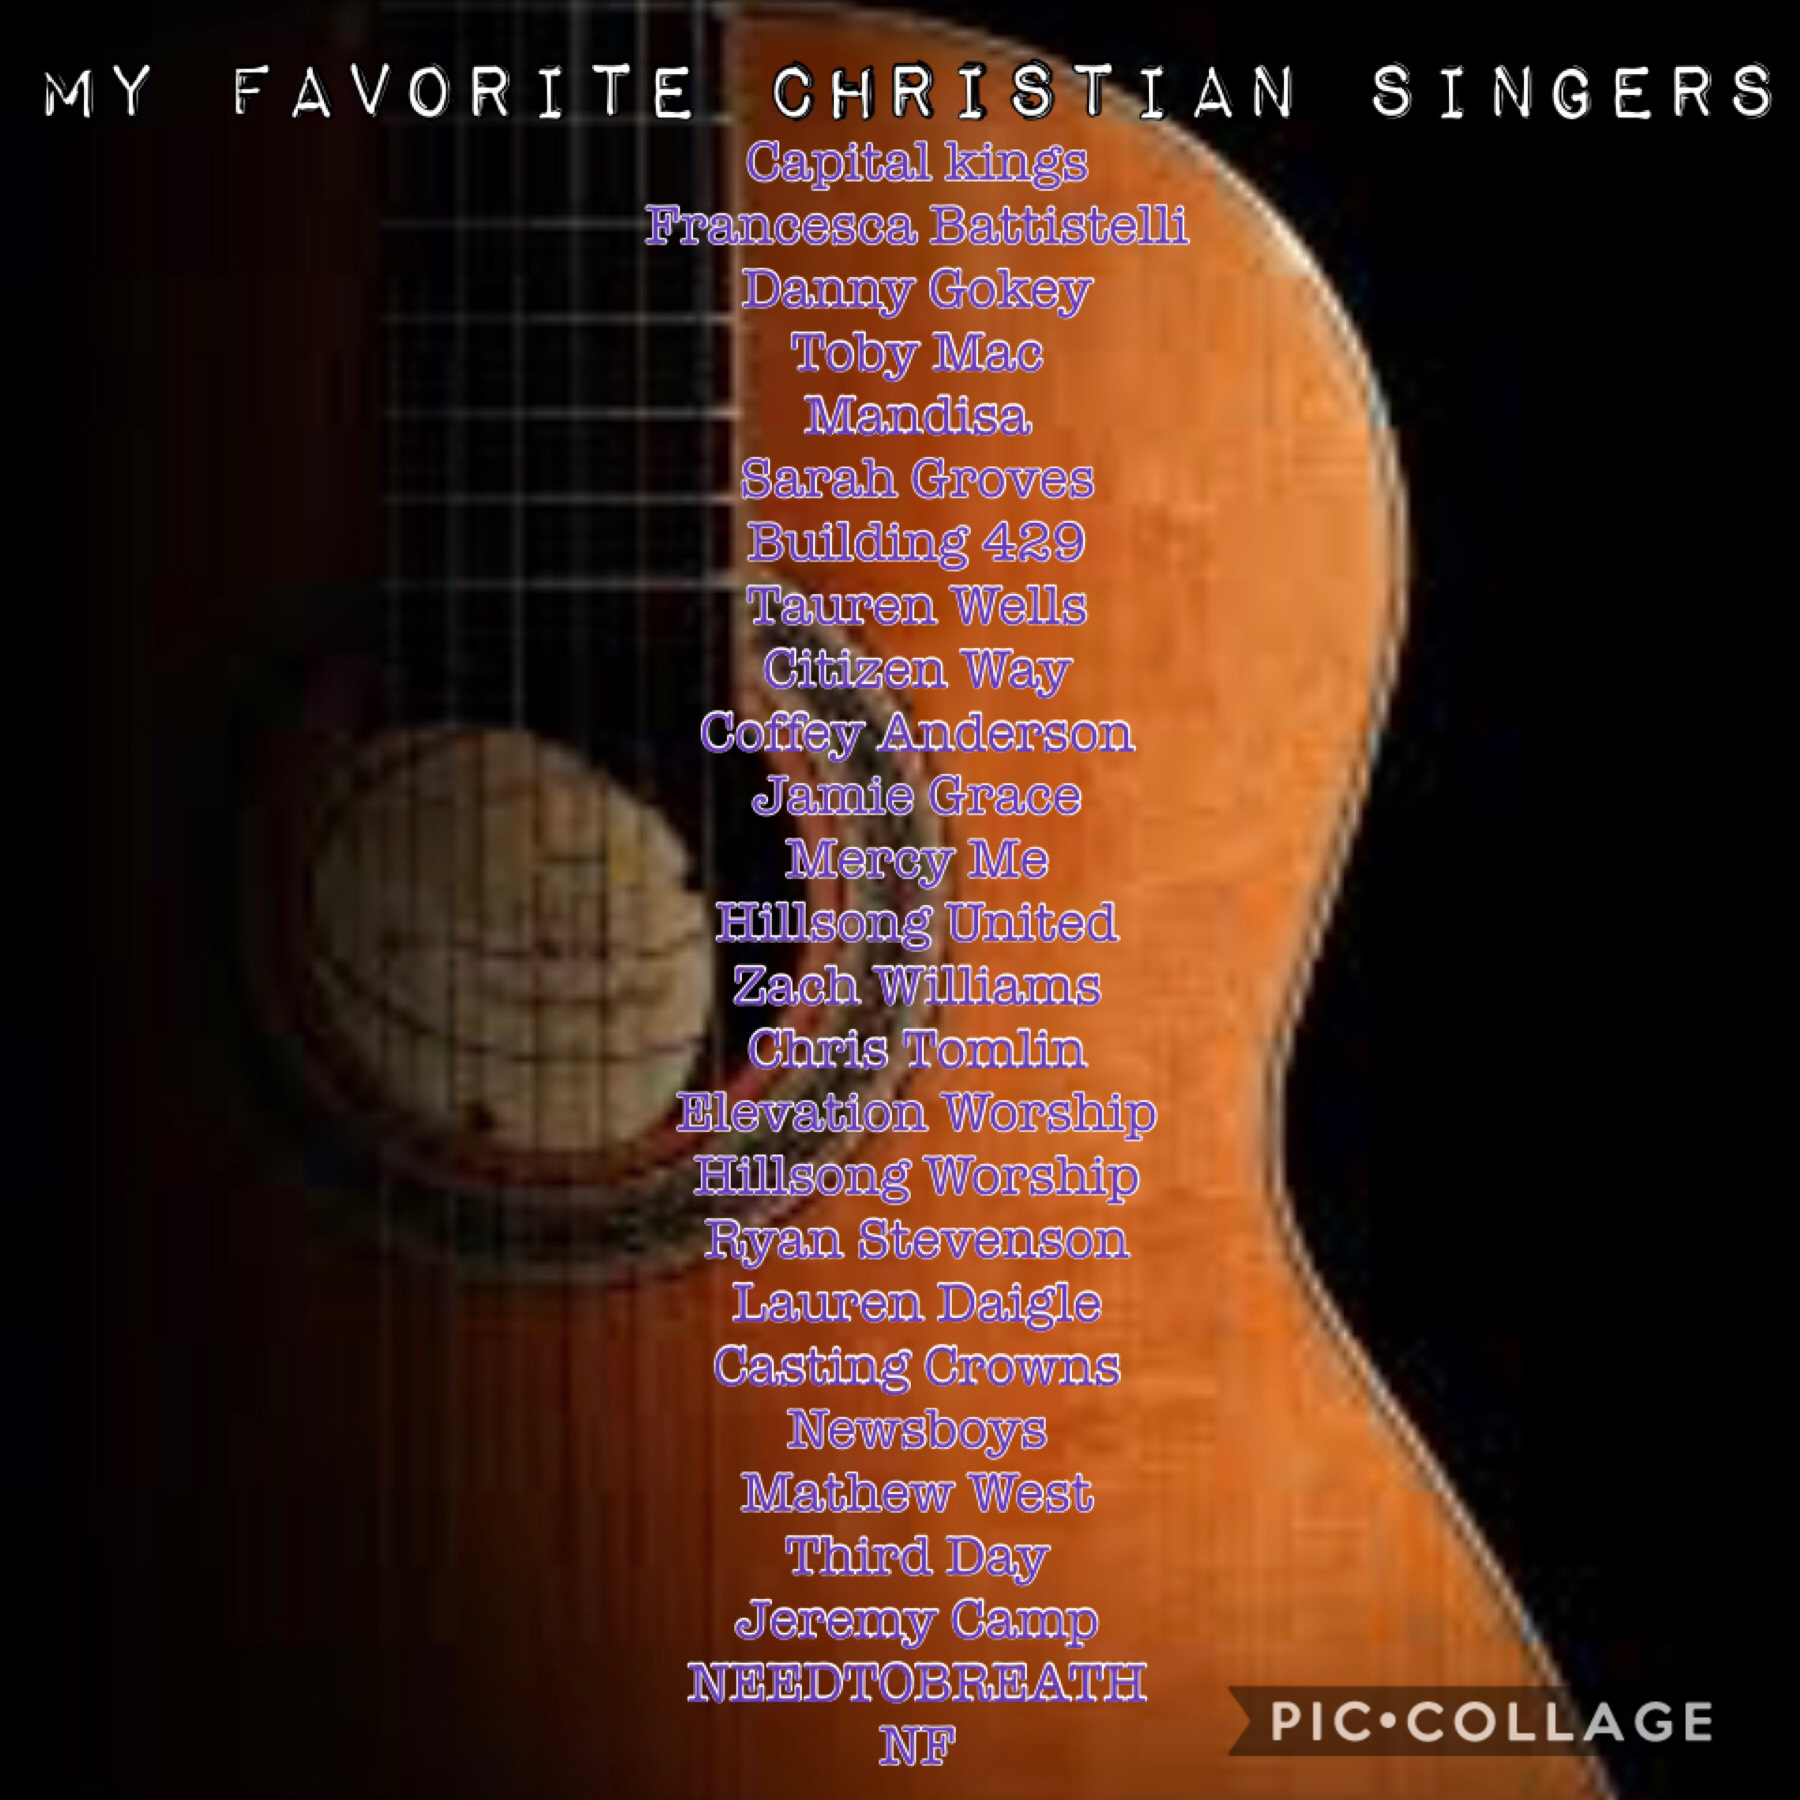 Who is your favorite Christian singer?